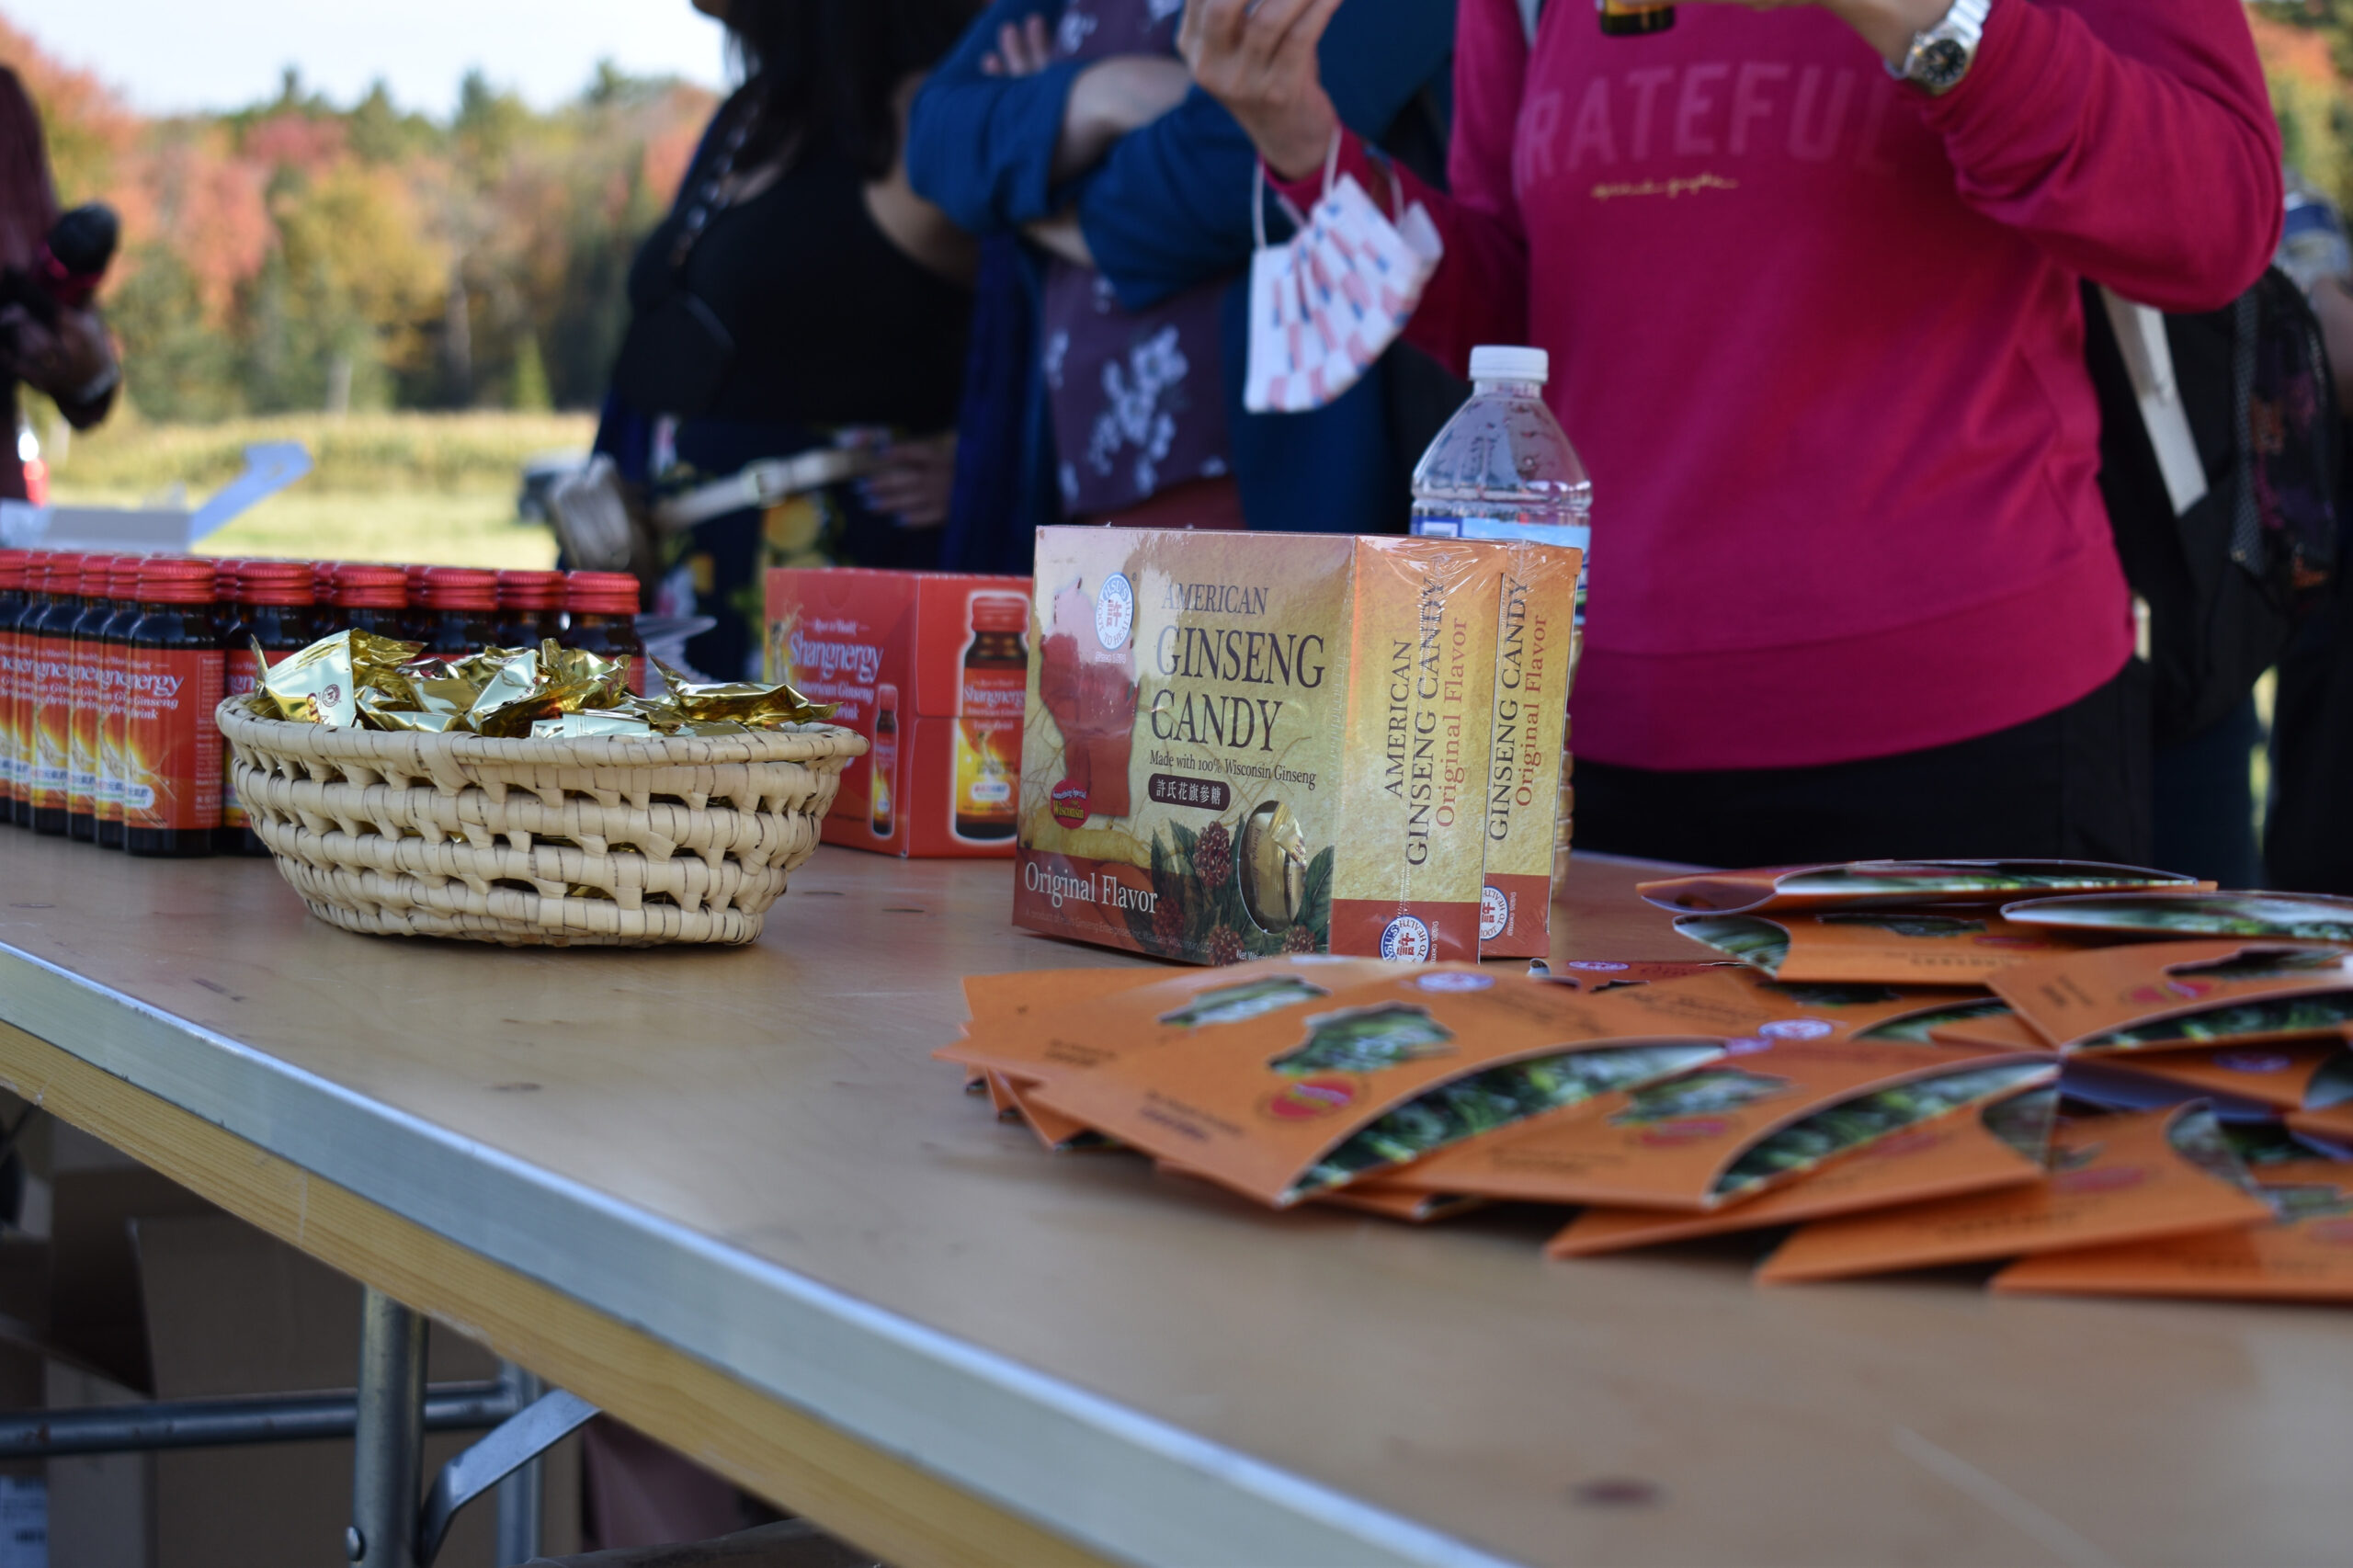 Ginseng products are arrayed on a table at an event in Wausau